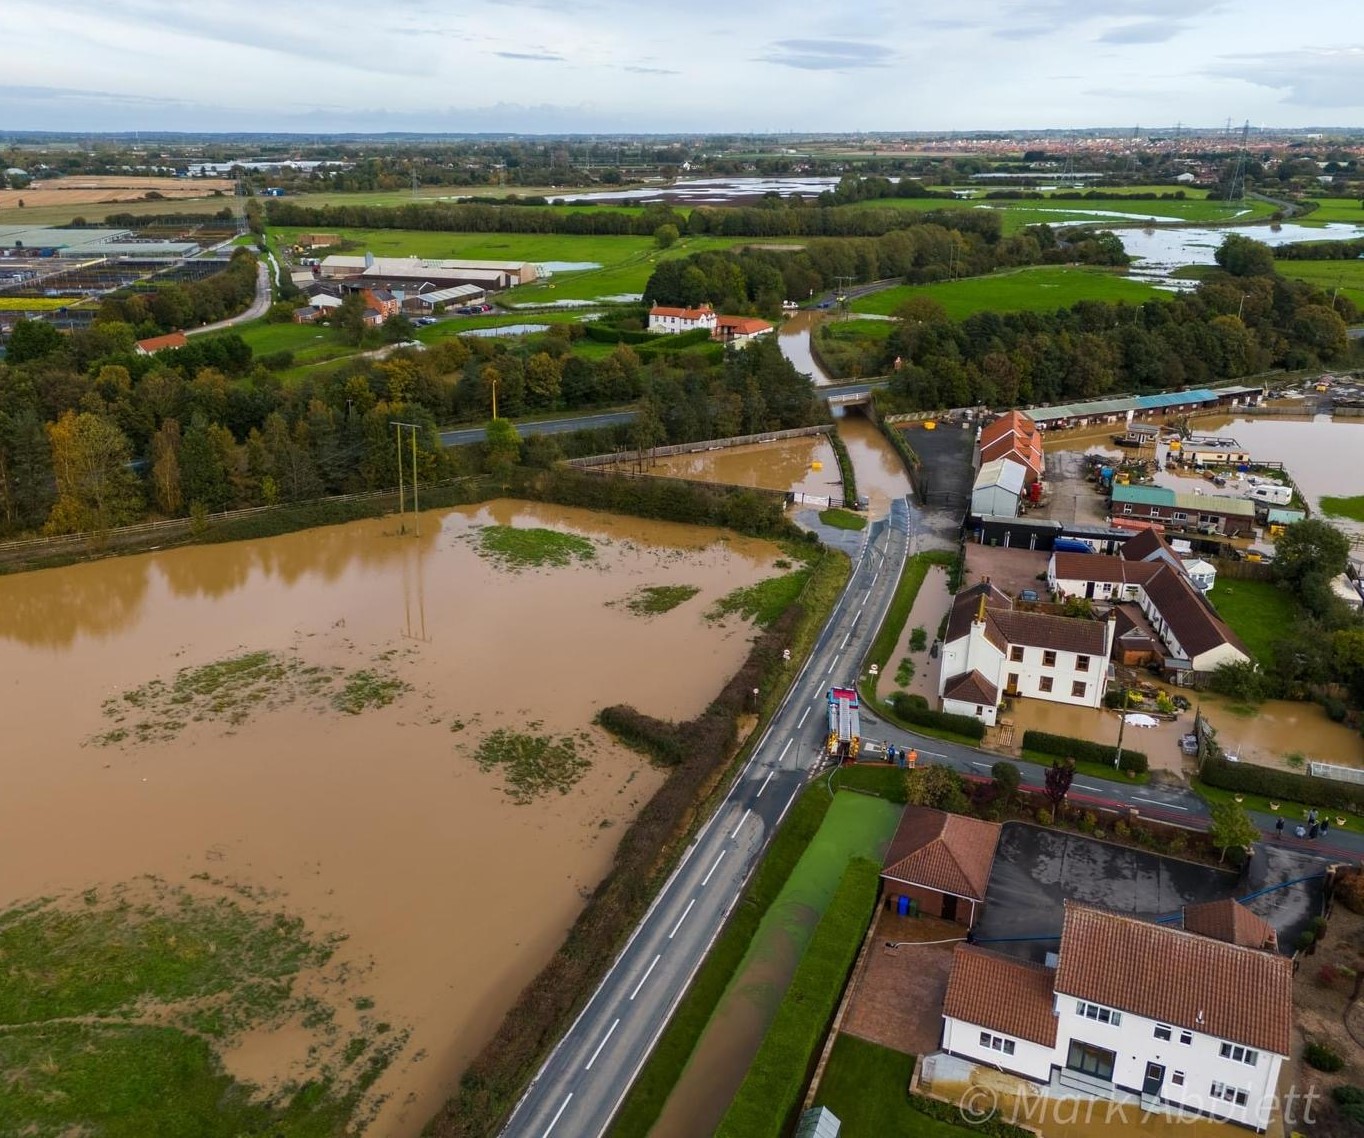 Possible Flooding Expected Council Is On Standby Residents Urged To Be Prepared